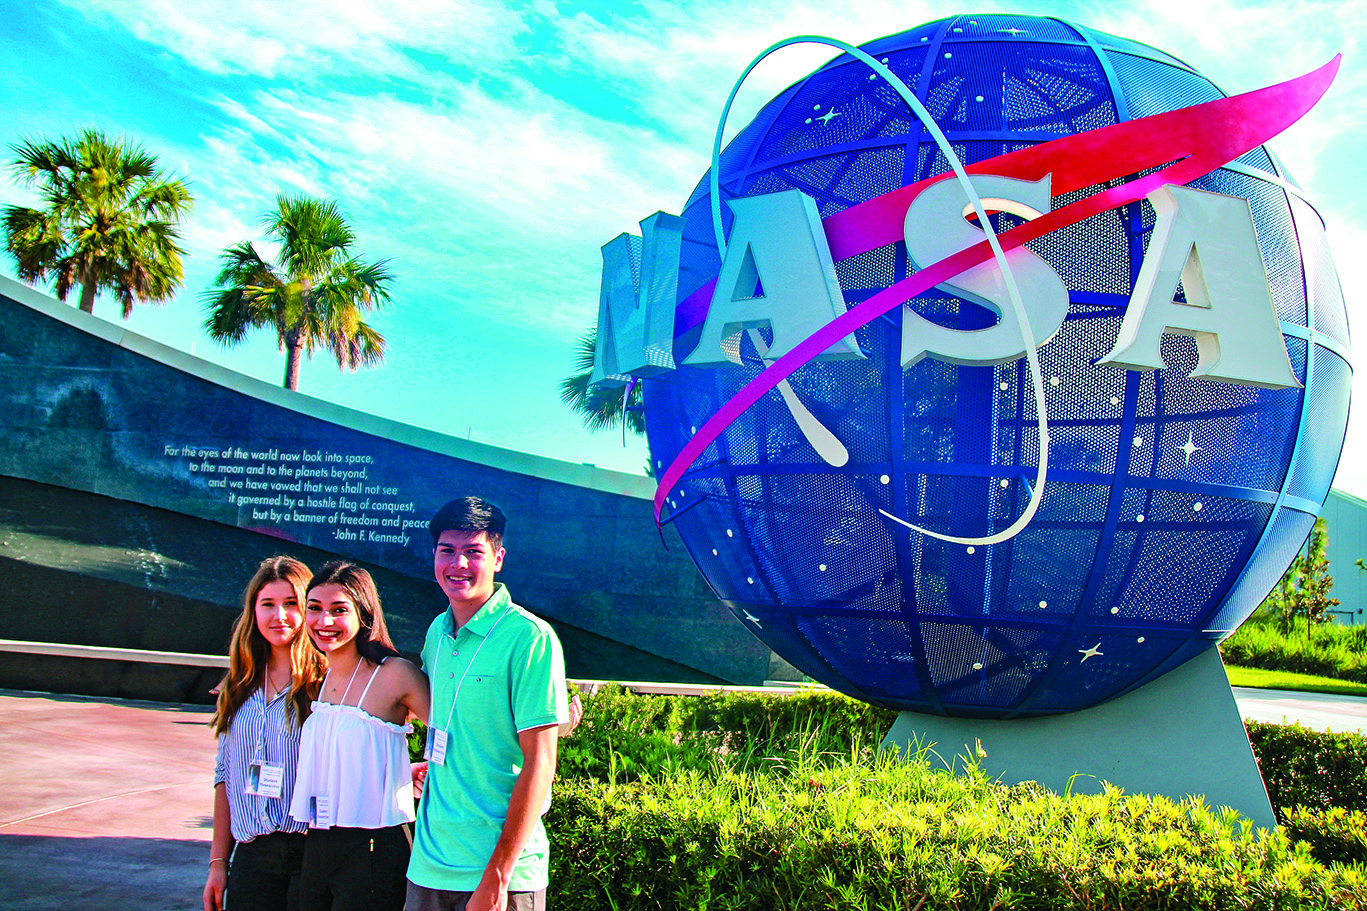 Three smiling students with badges standing in front of an sculpture of the NASA logo: a blue sphere with NASA in white blocky font and a red stylized arrow